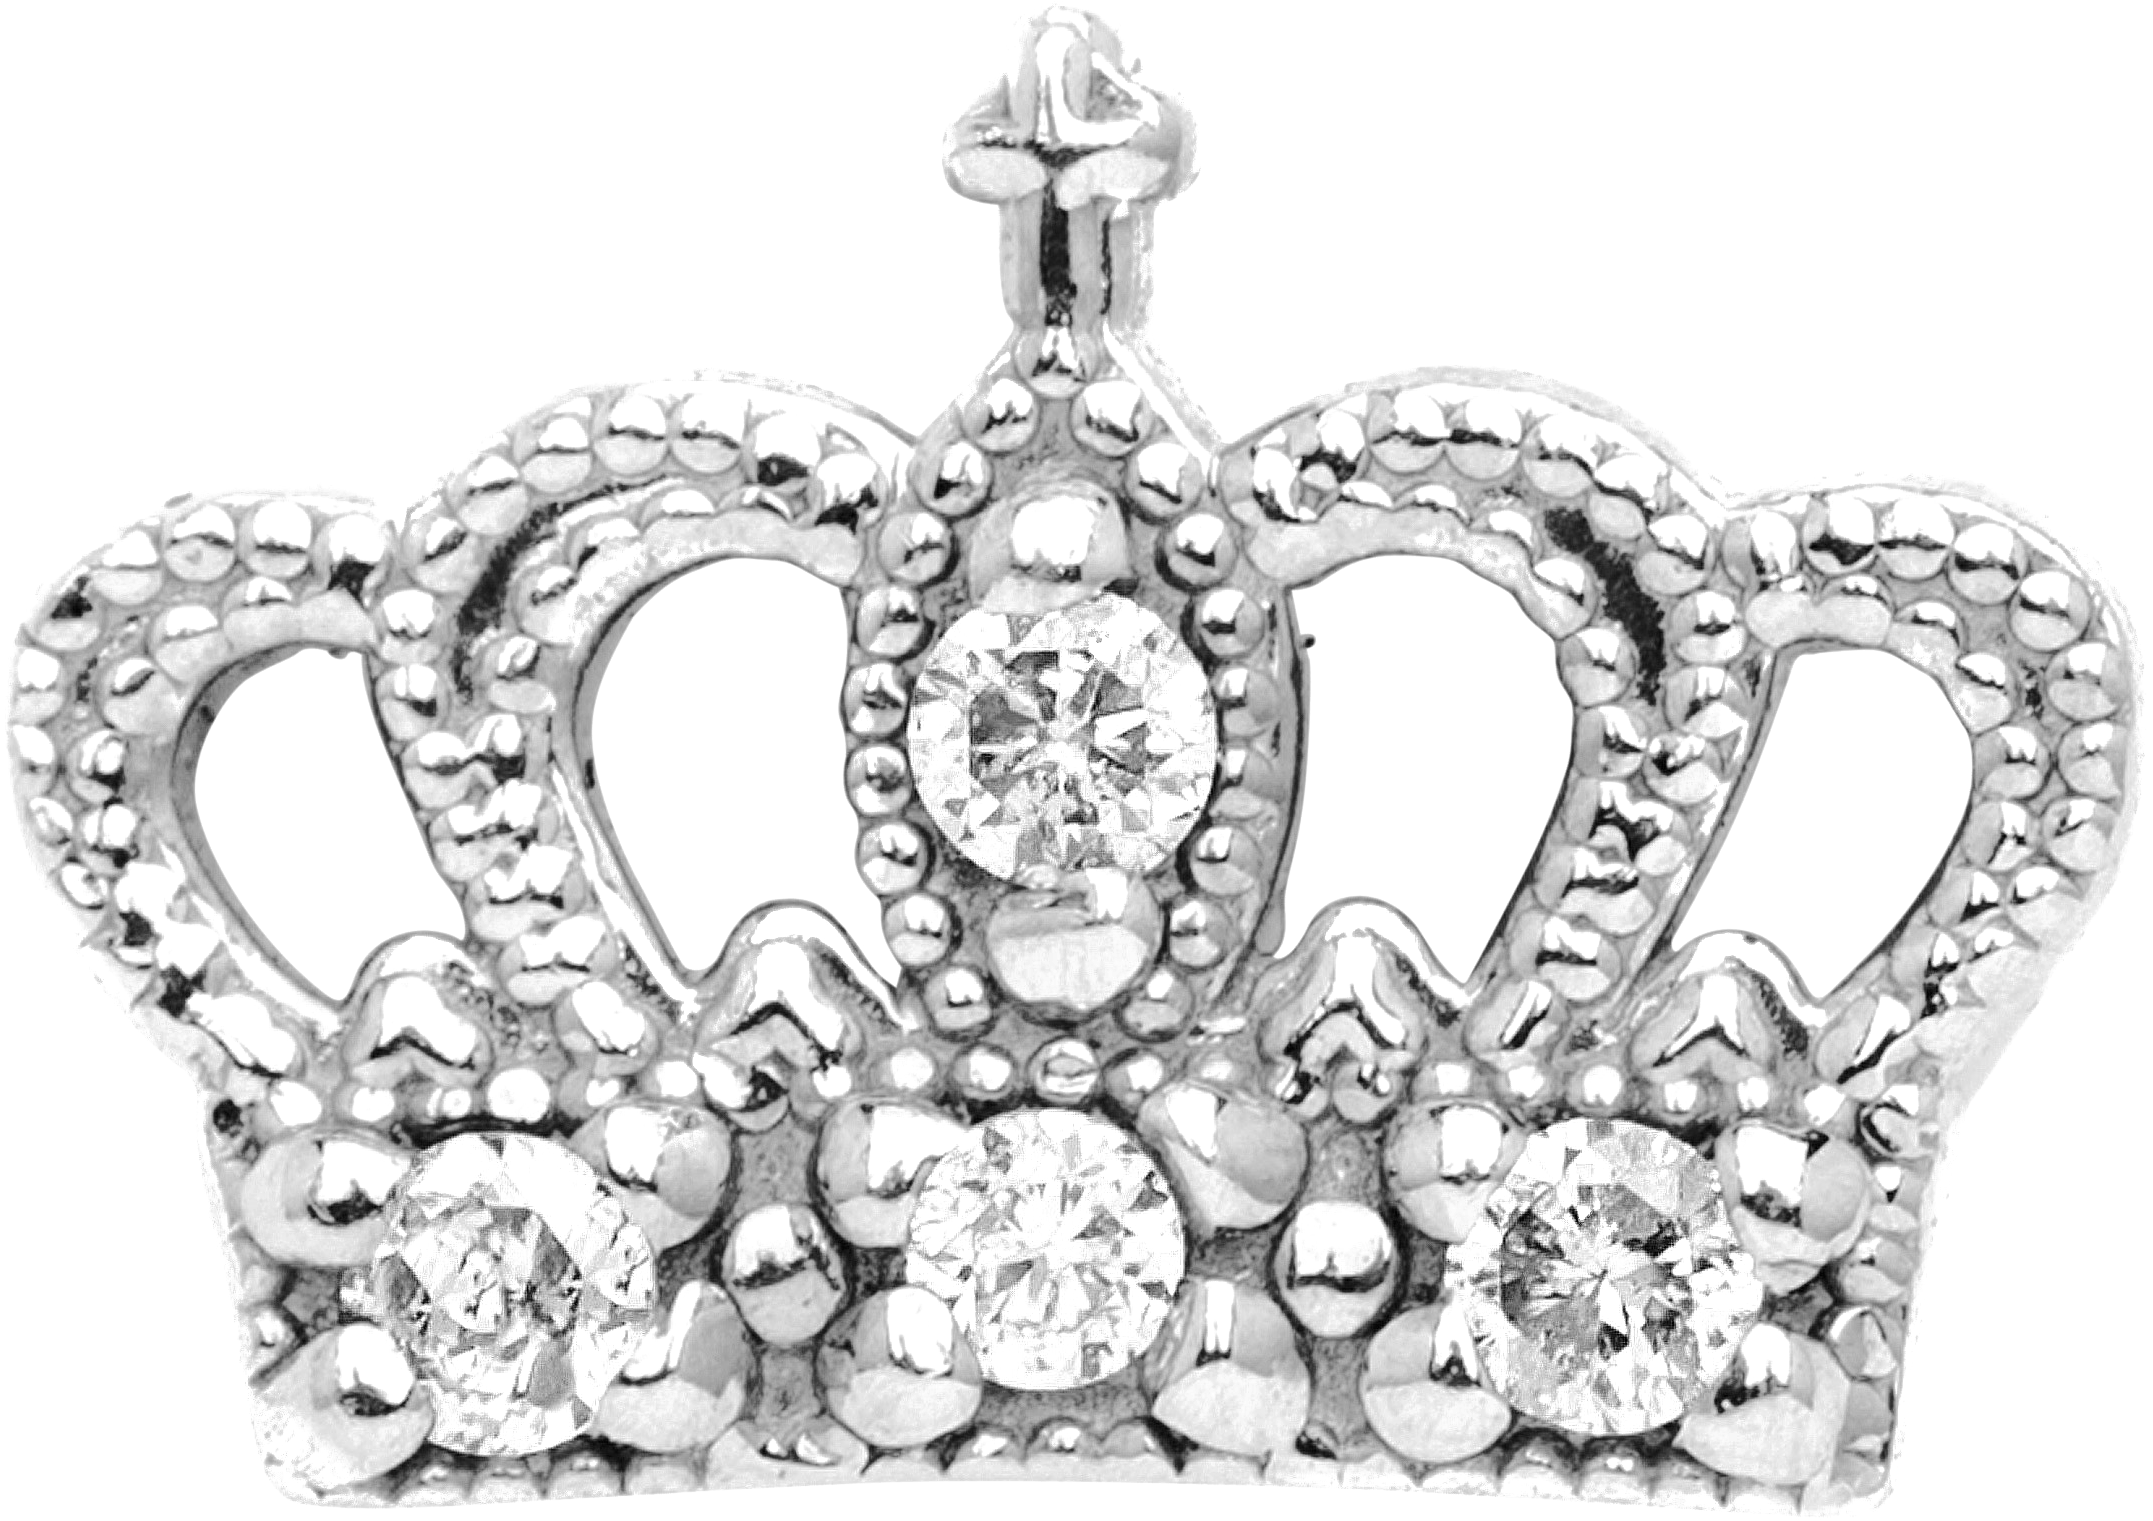 A Silver Crown With Diamonds